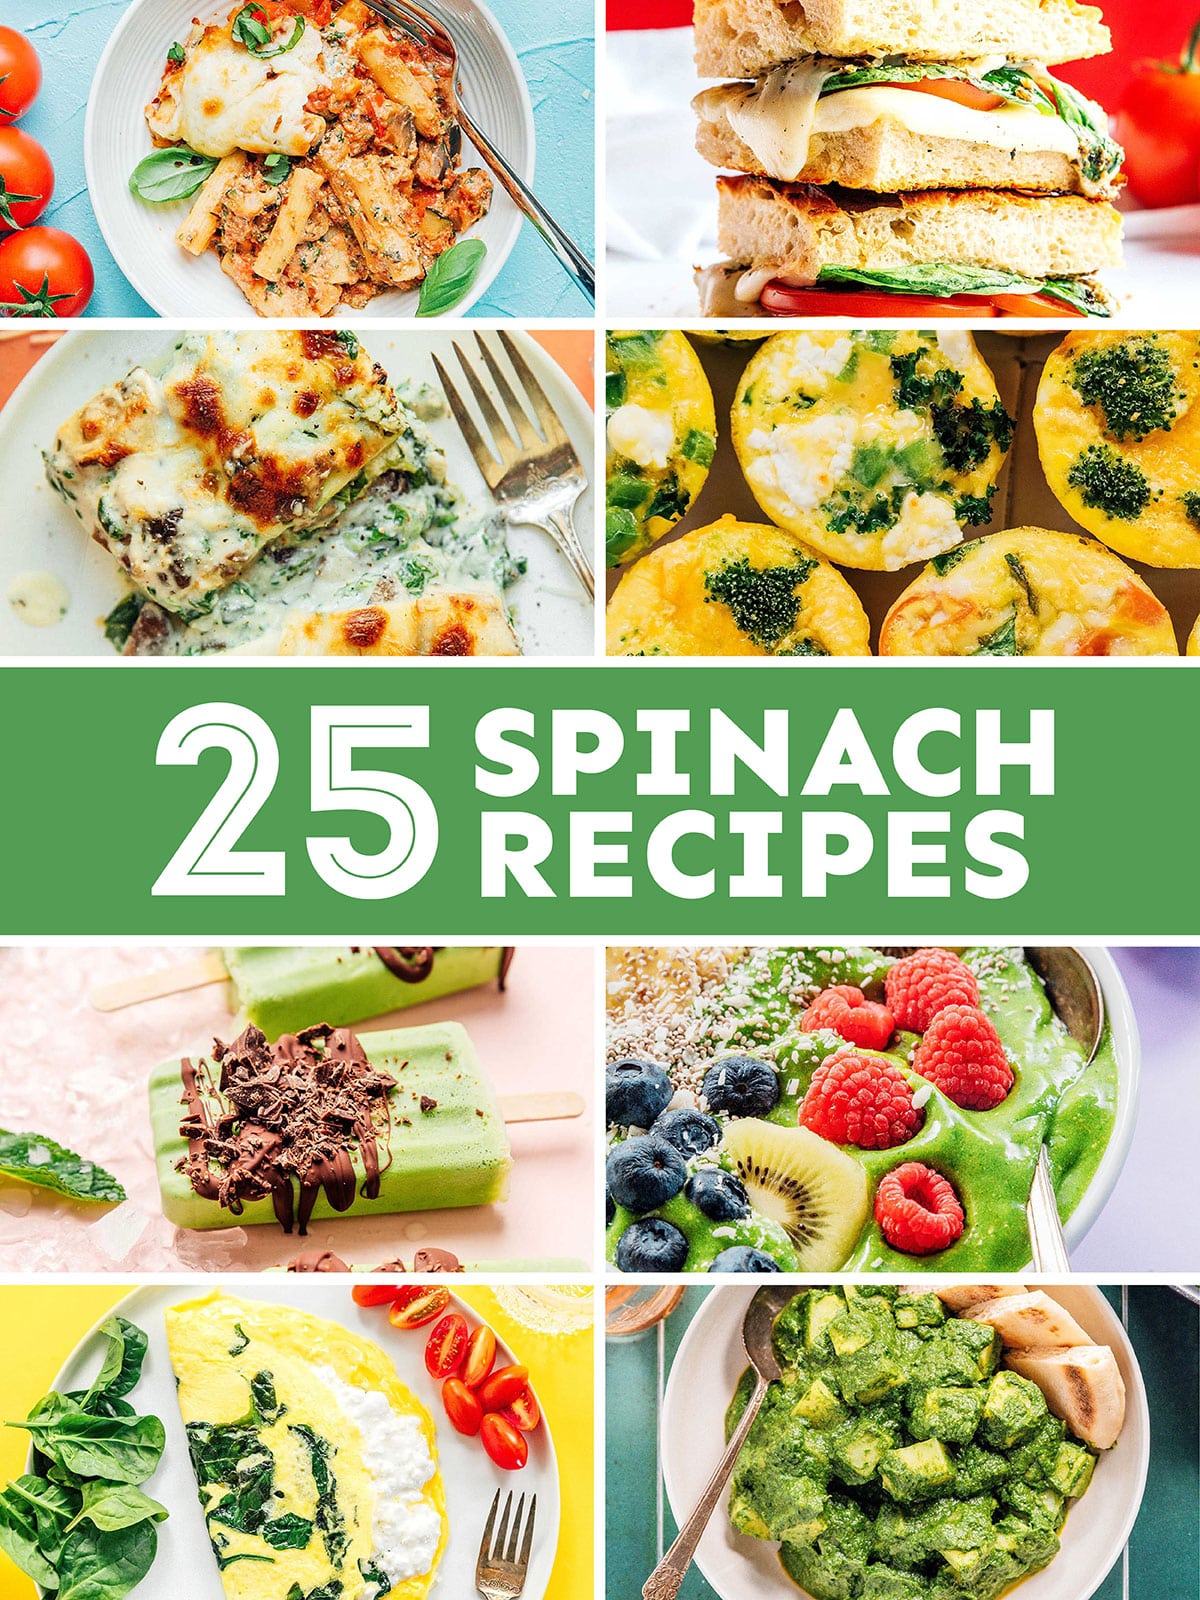 Collage that says "25 spinach recipes".